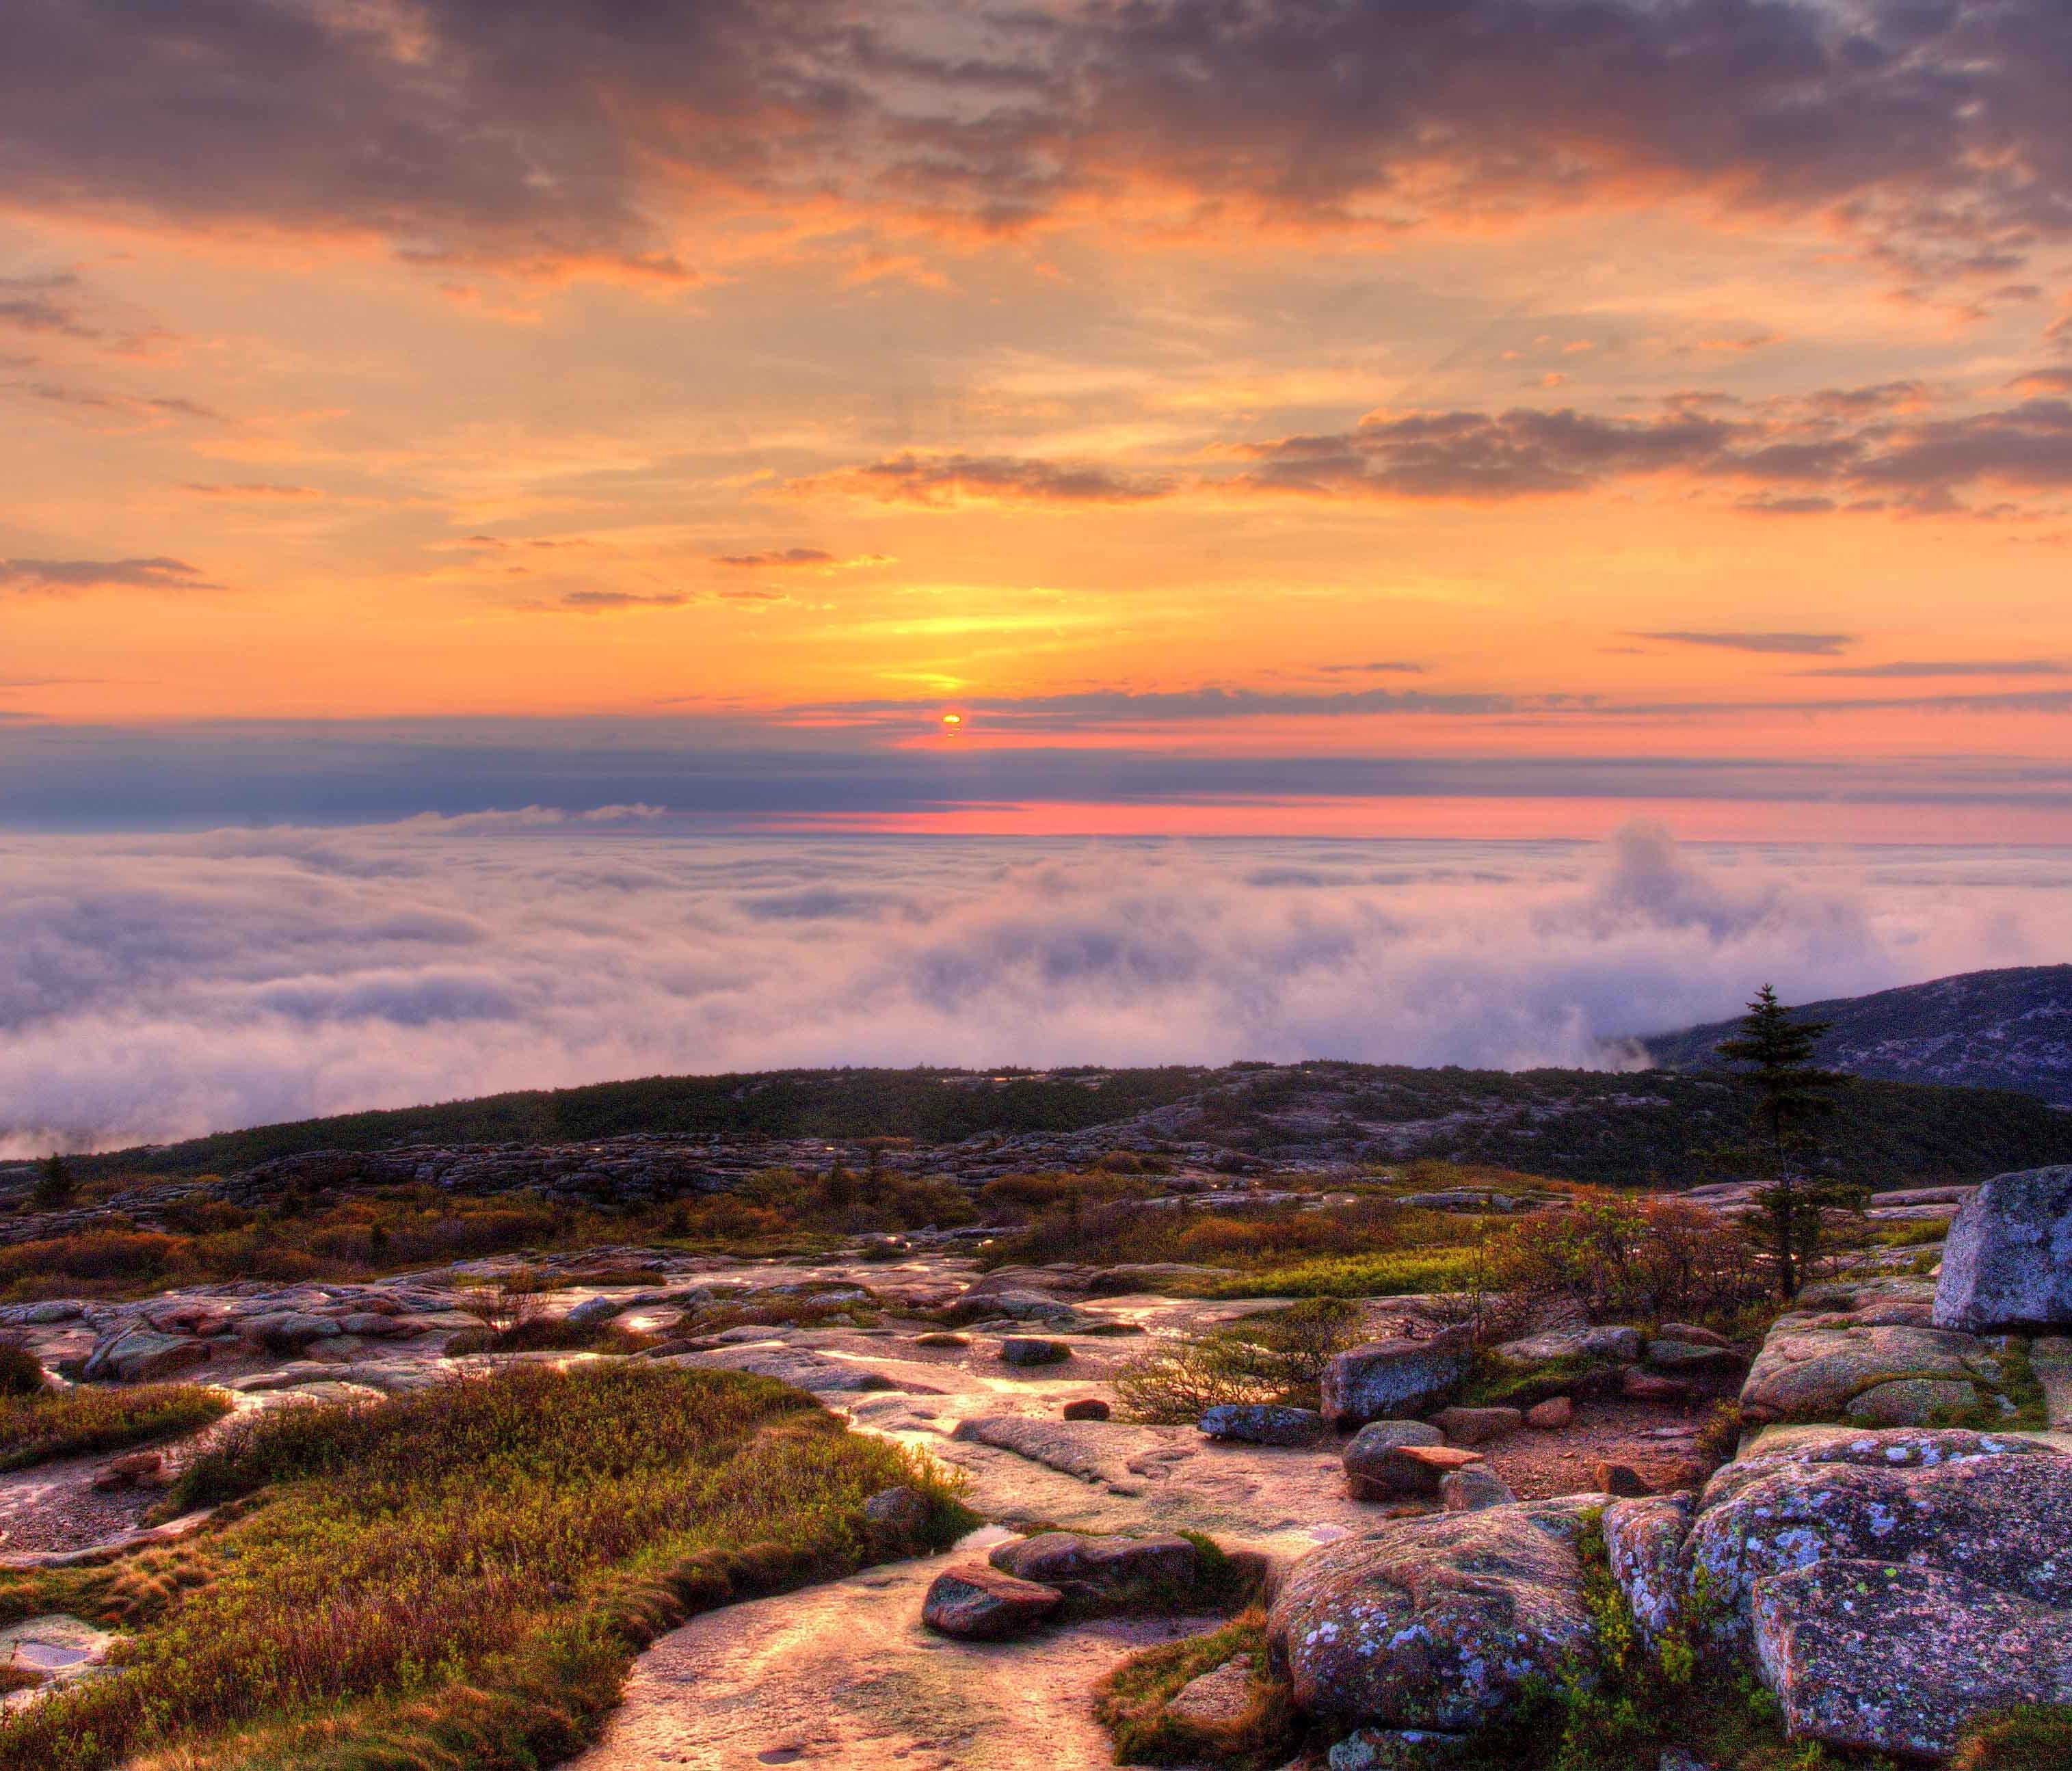 Pastel sunrise colors paint the sky over an ocean of clouds. Sunrises at Acadia National Park are the best!